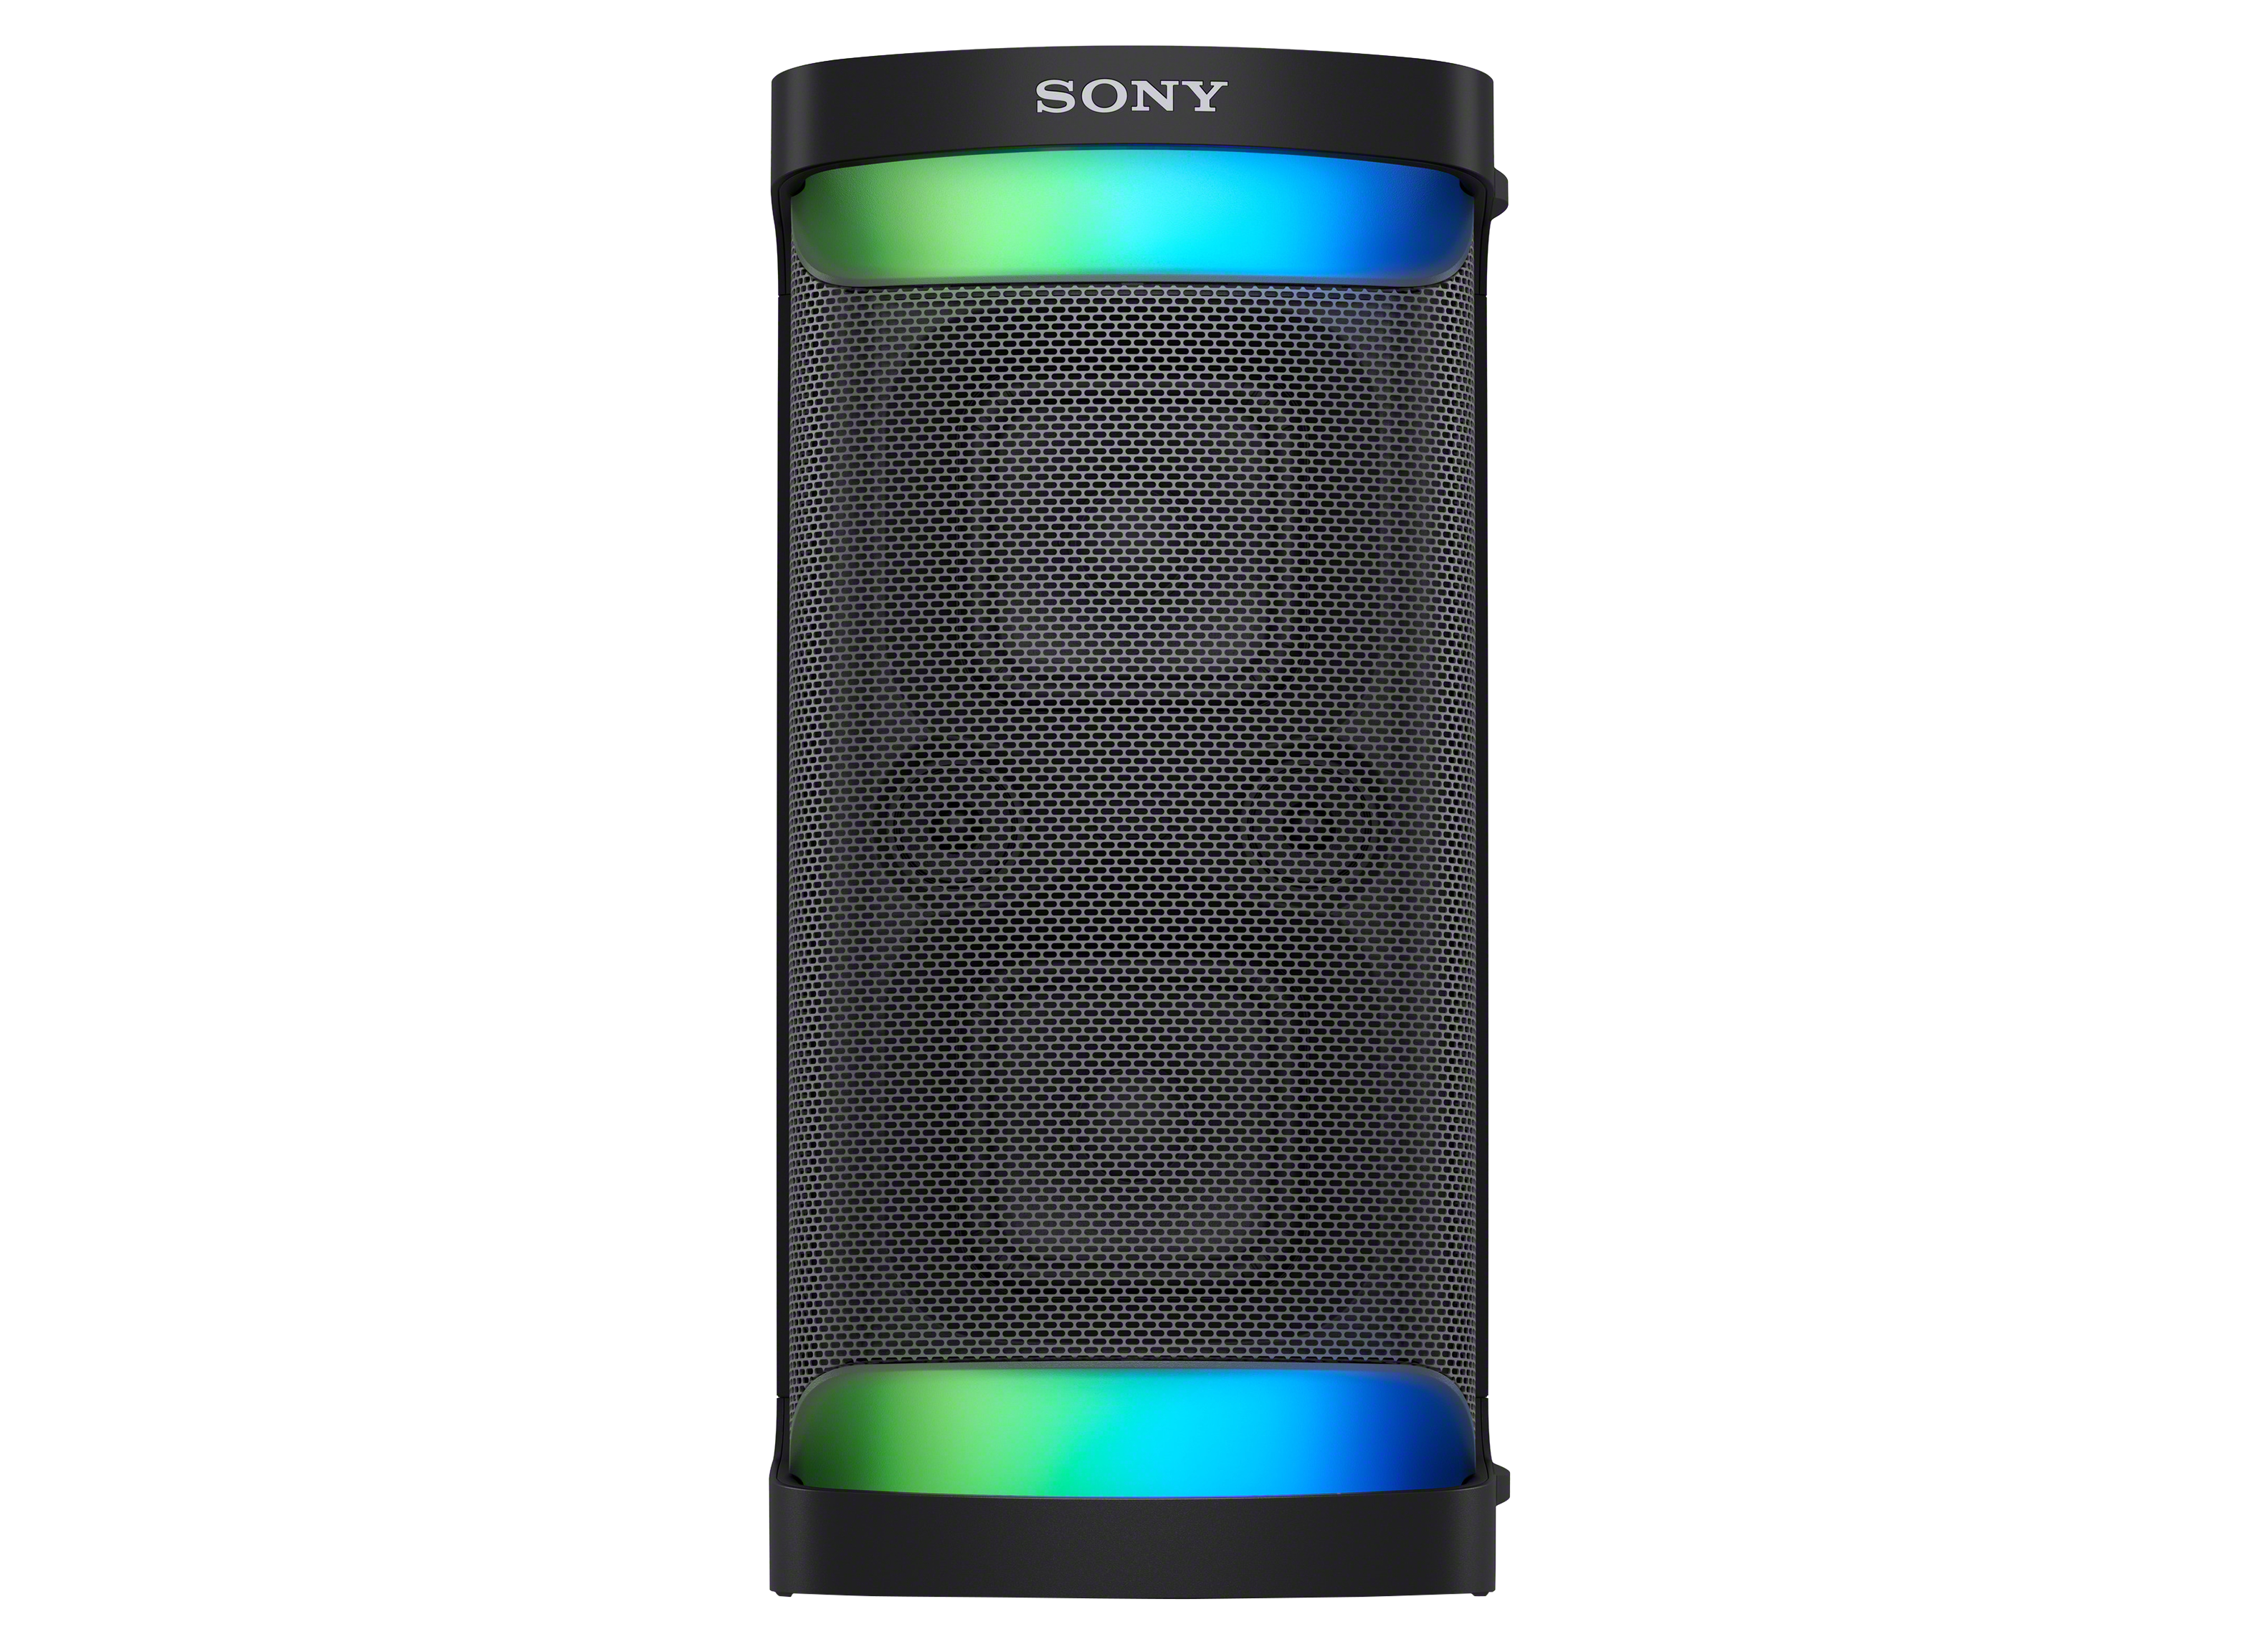 & Wireless Speaker - Reports Review SRS-XP500 Bluetooth Consumer Sony